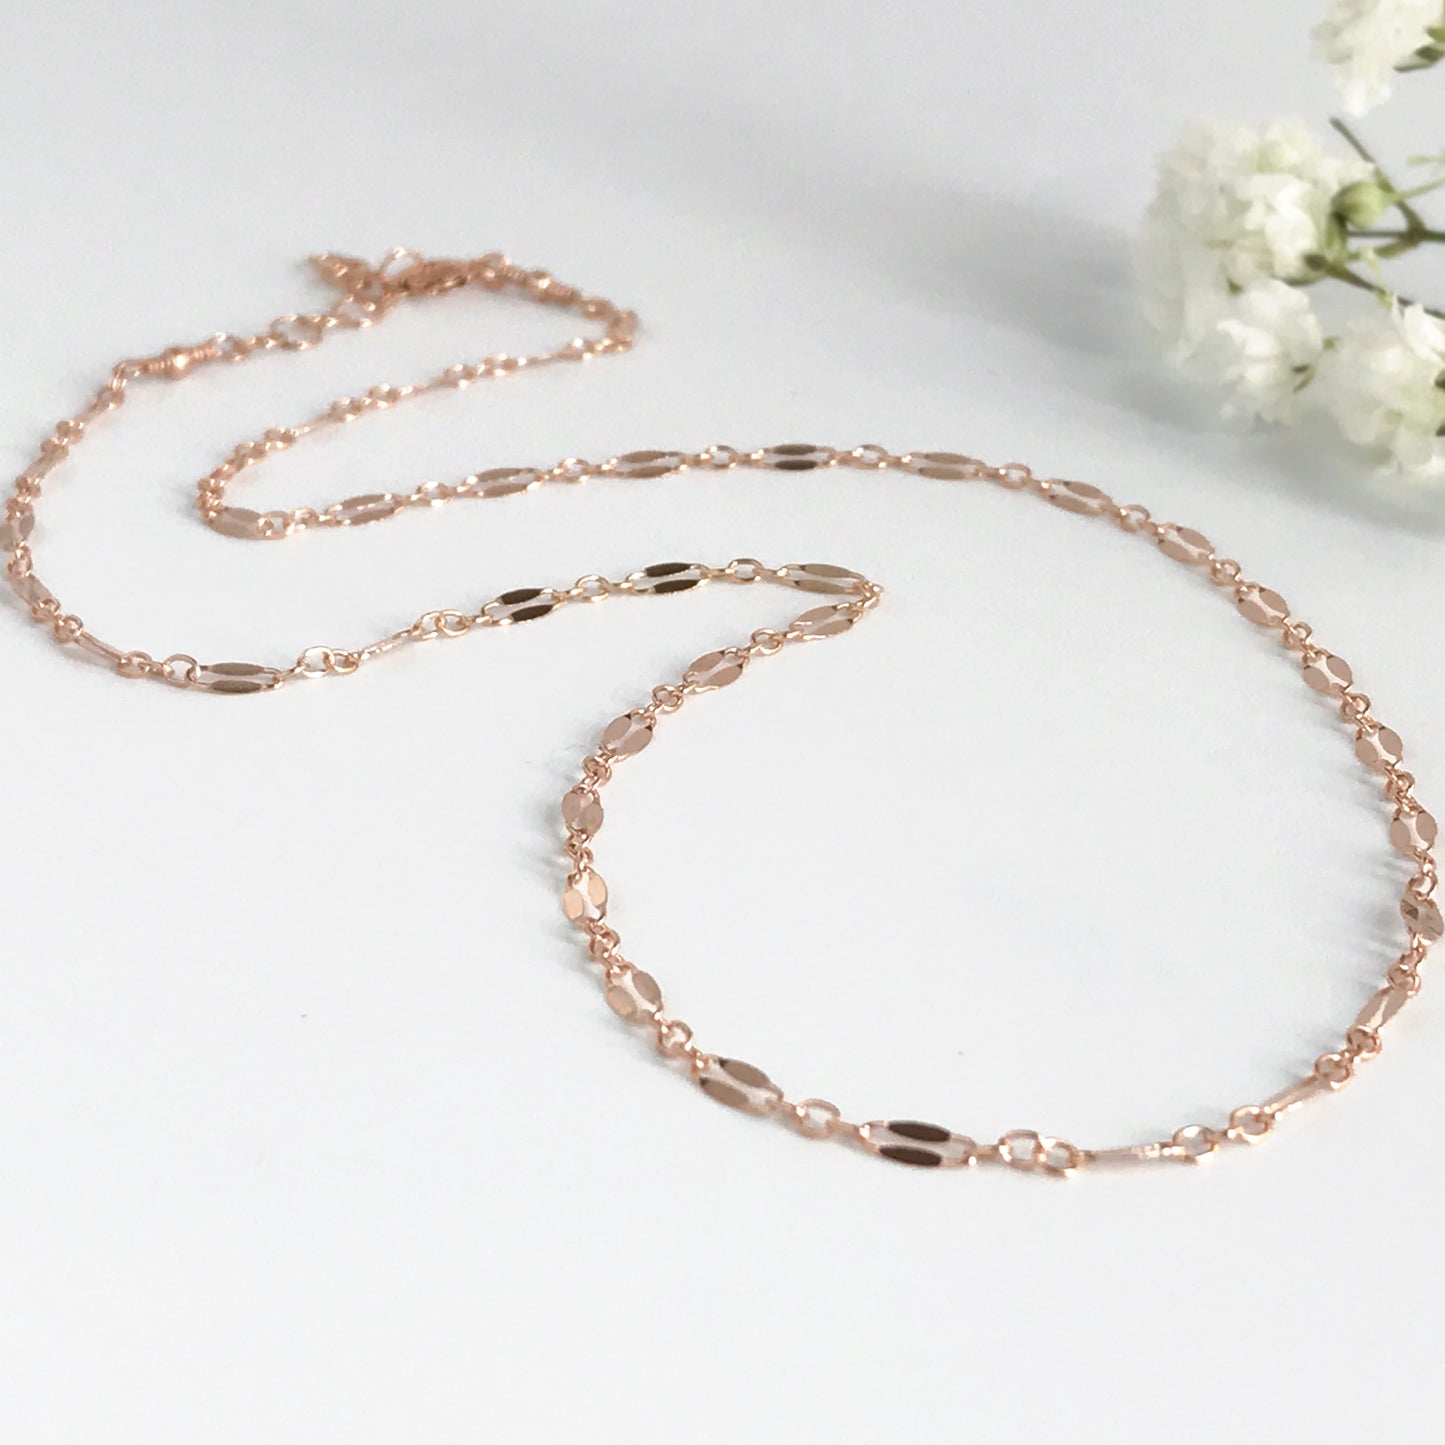 Dainty Lace Chain Rose Gold Choker Necklace